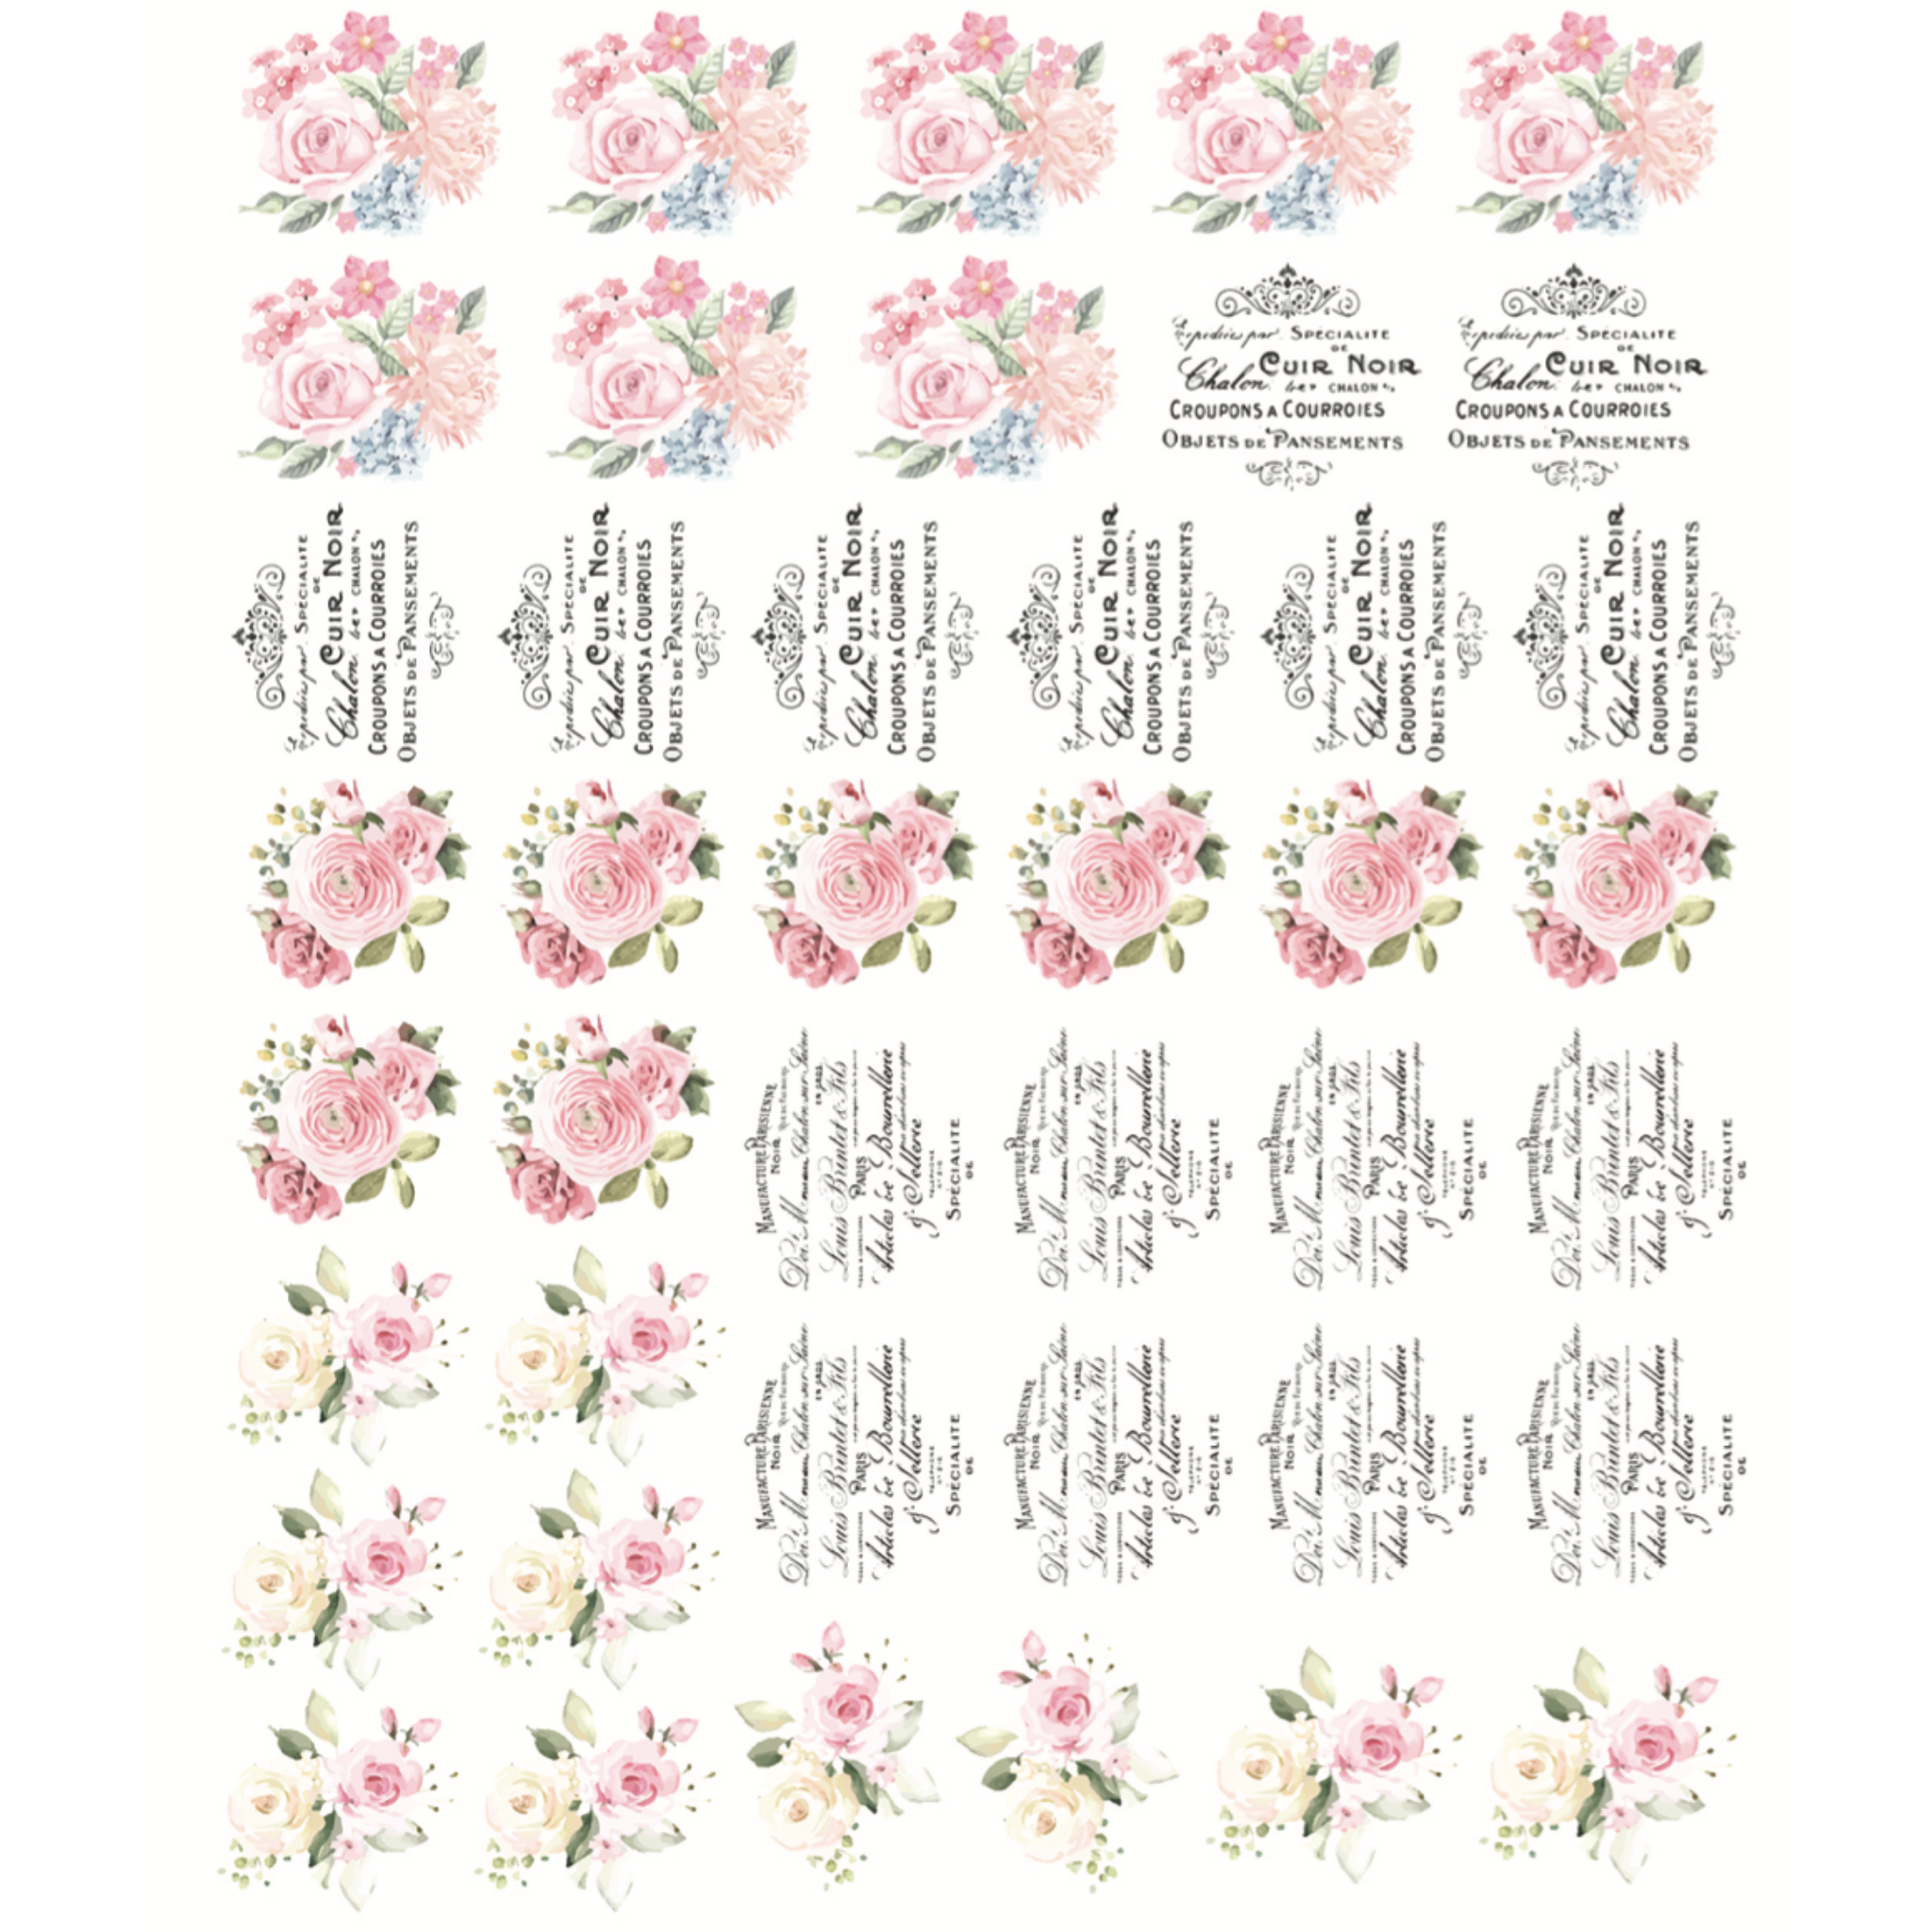 Rub-on knob transfers of script writing, and different pink rose bouquets..